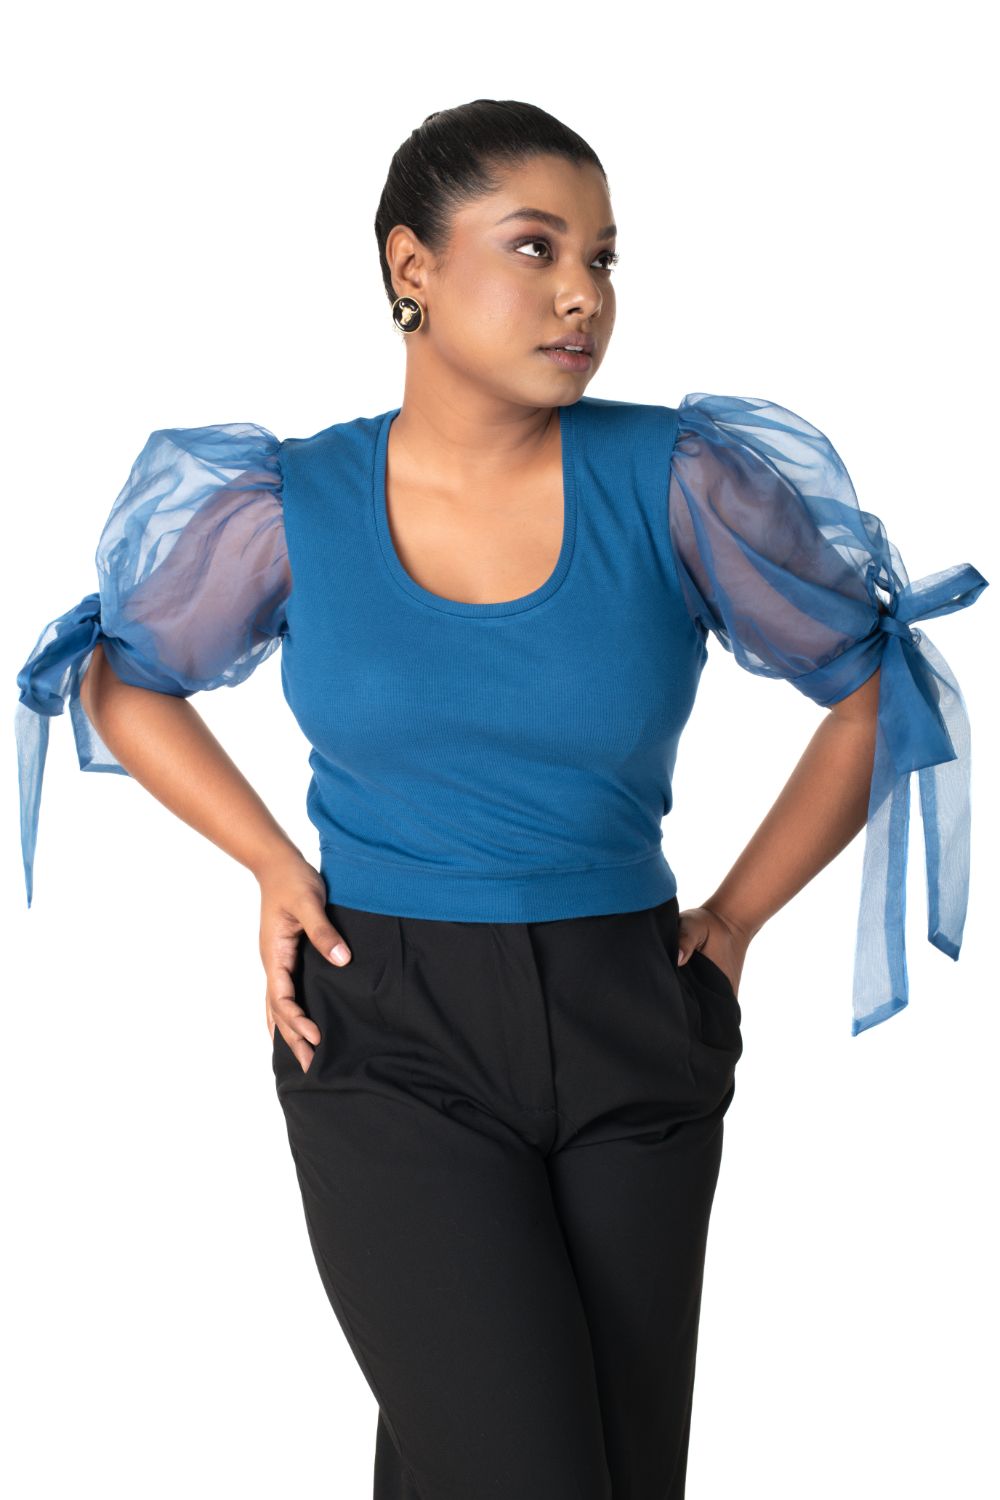 Round neck Blouses with Bow Tied-up Sleeves- Plus Size - Azure Blue - Blouse featured